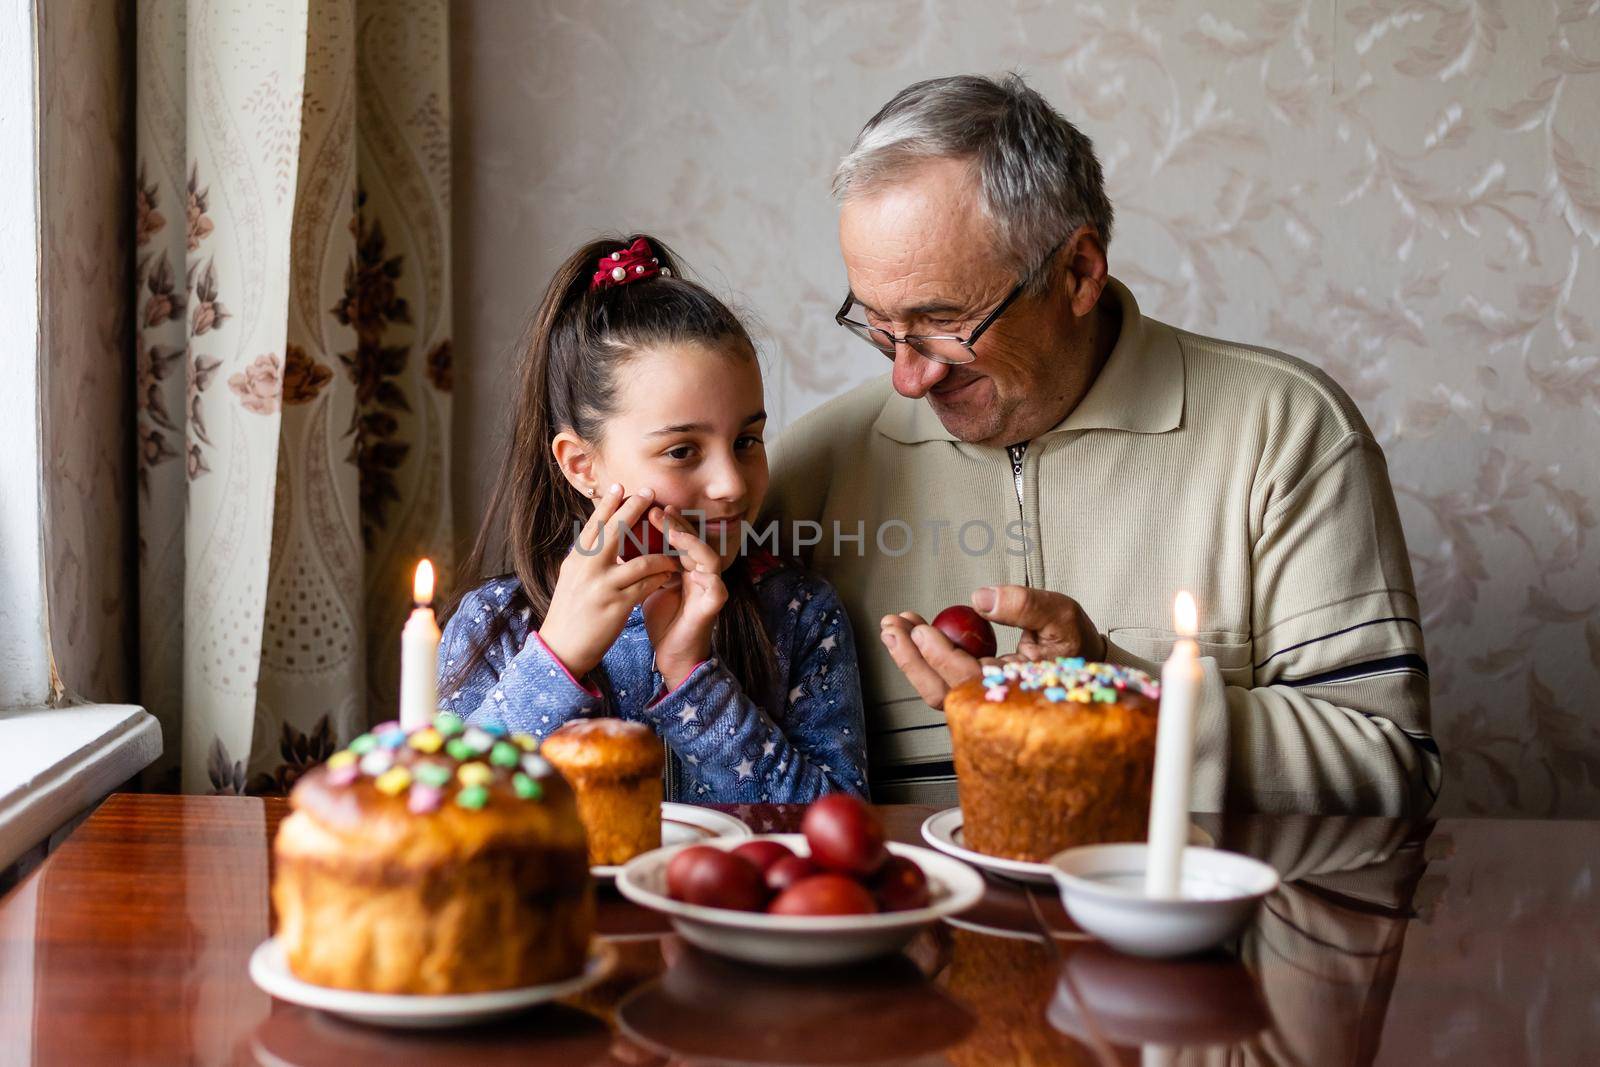 grandfather and granddaughter at a festive table to celebrate Easter by Andelov13